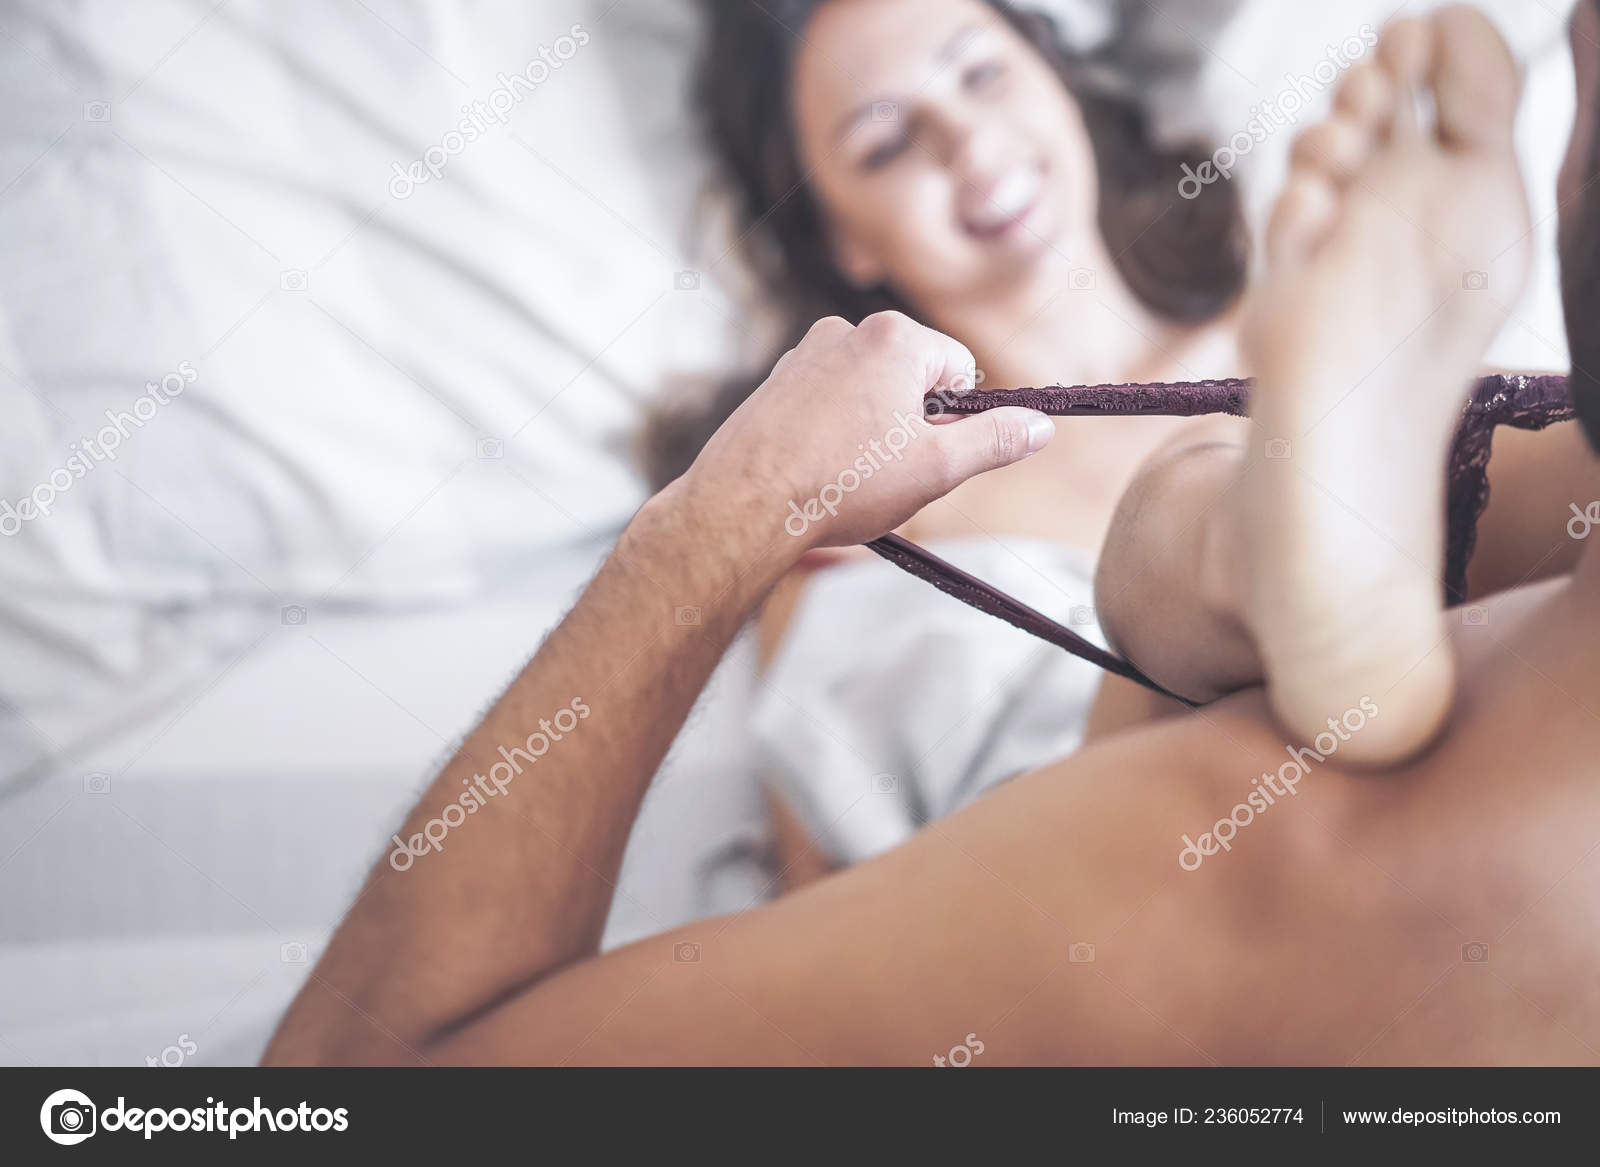 Boyfriend Putting His Girlfriends Panties Having Sex Bed Passionate Couple Stock Photo by ©AlessandroBiascioli 236052774 photo pic image